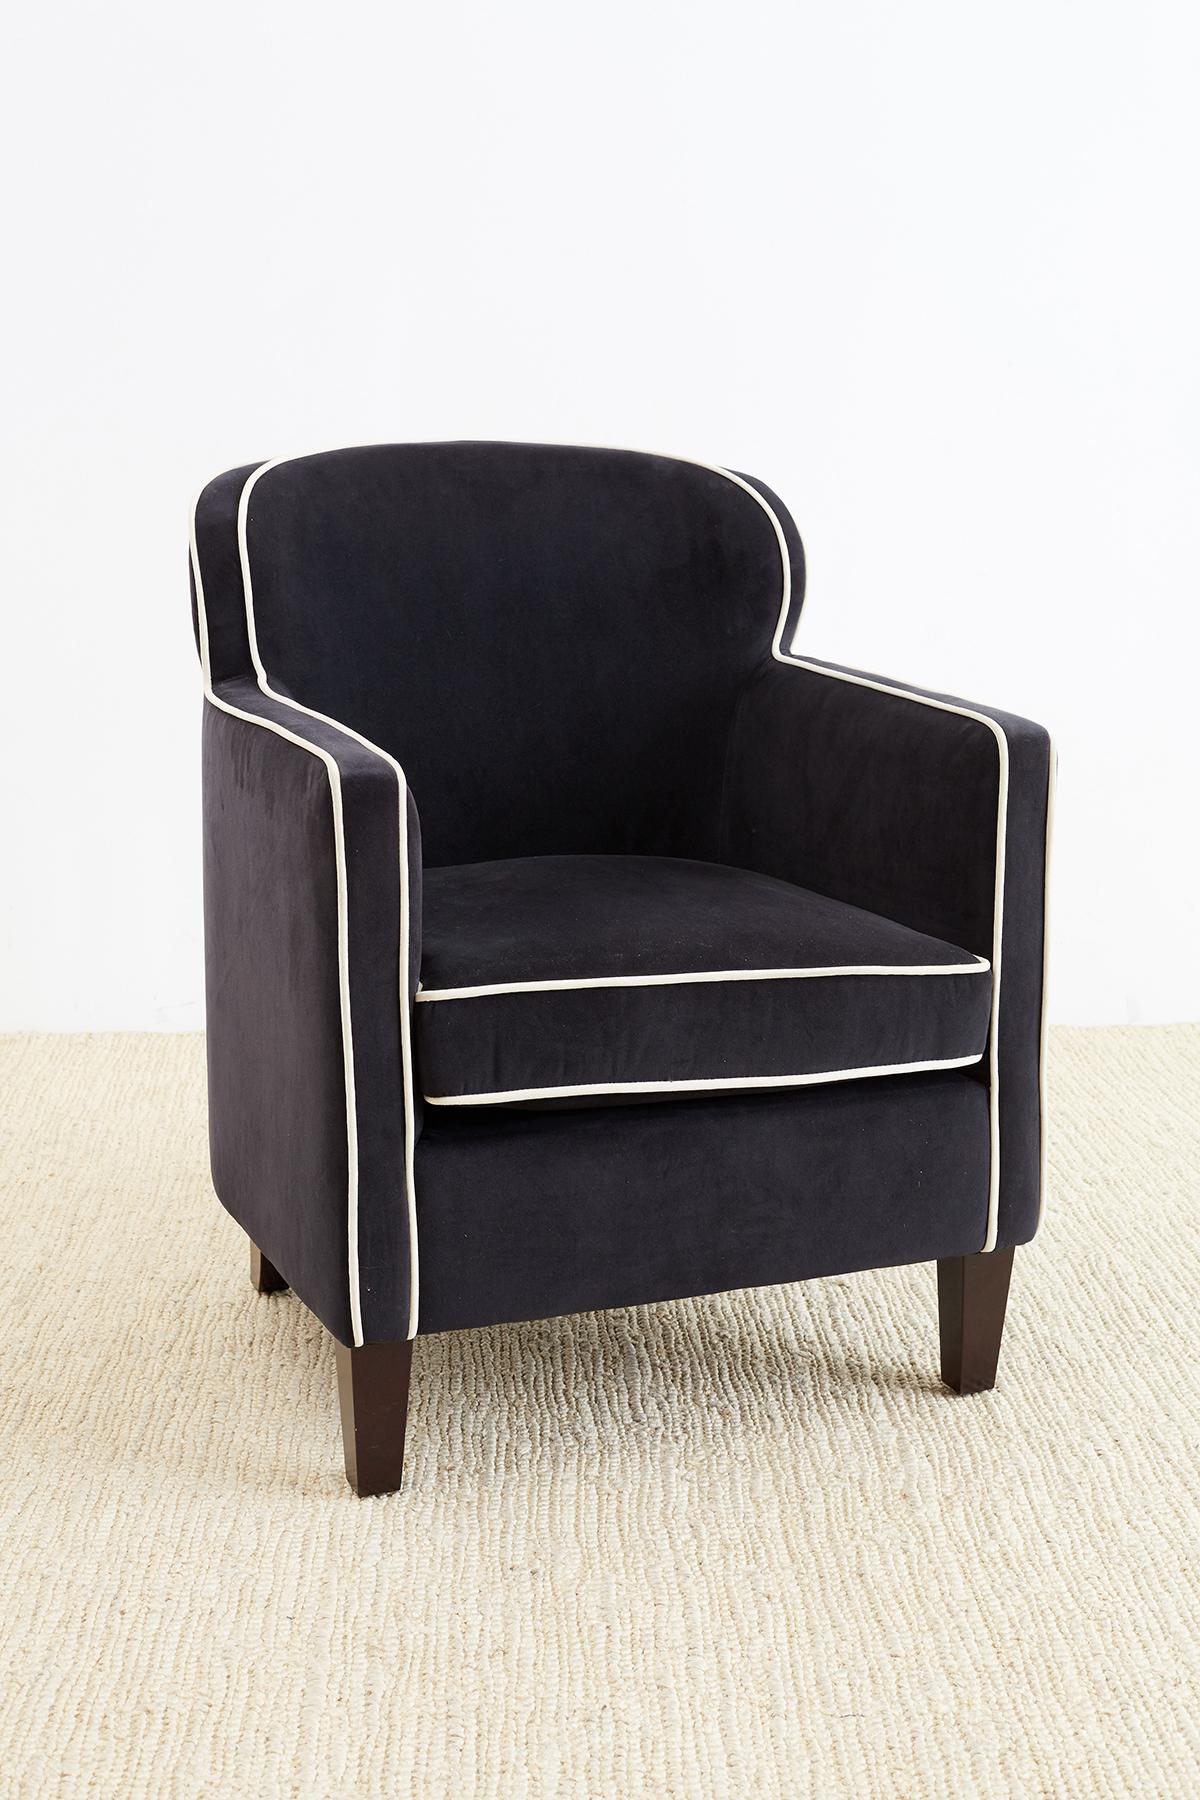 Suave pair of bespoke black velvet club chairs or lounge chairs made in the old Hollywood Art Deco style. Featuring a round back with an elegant profile that is accented by white piping. Each chair has a removable padded cushion and is supported by